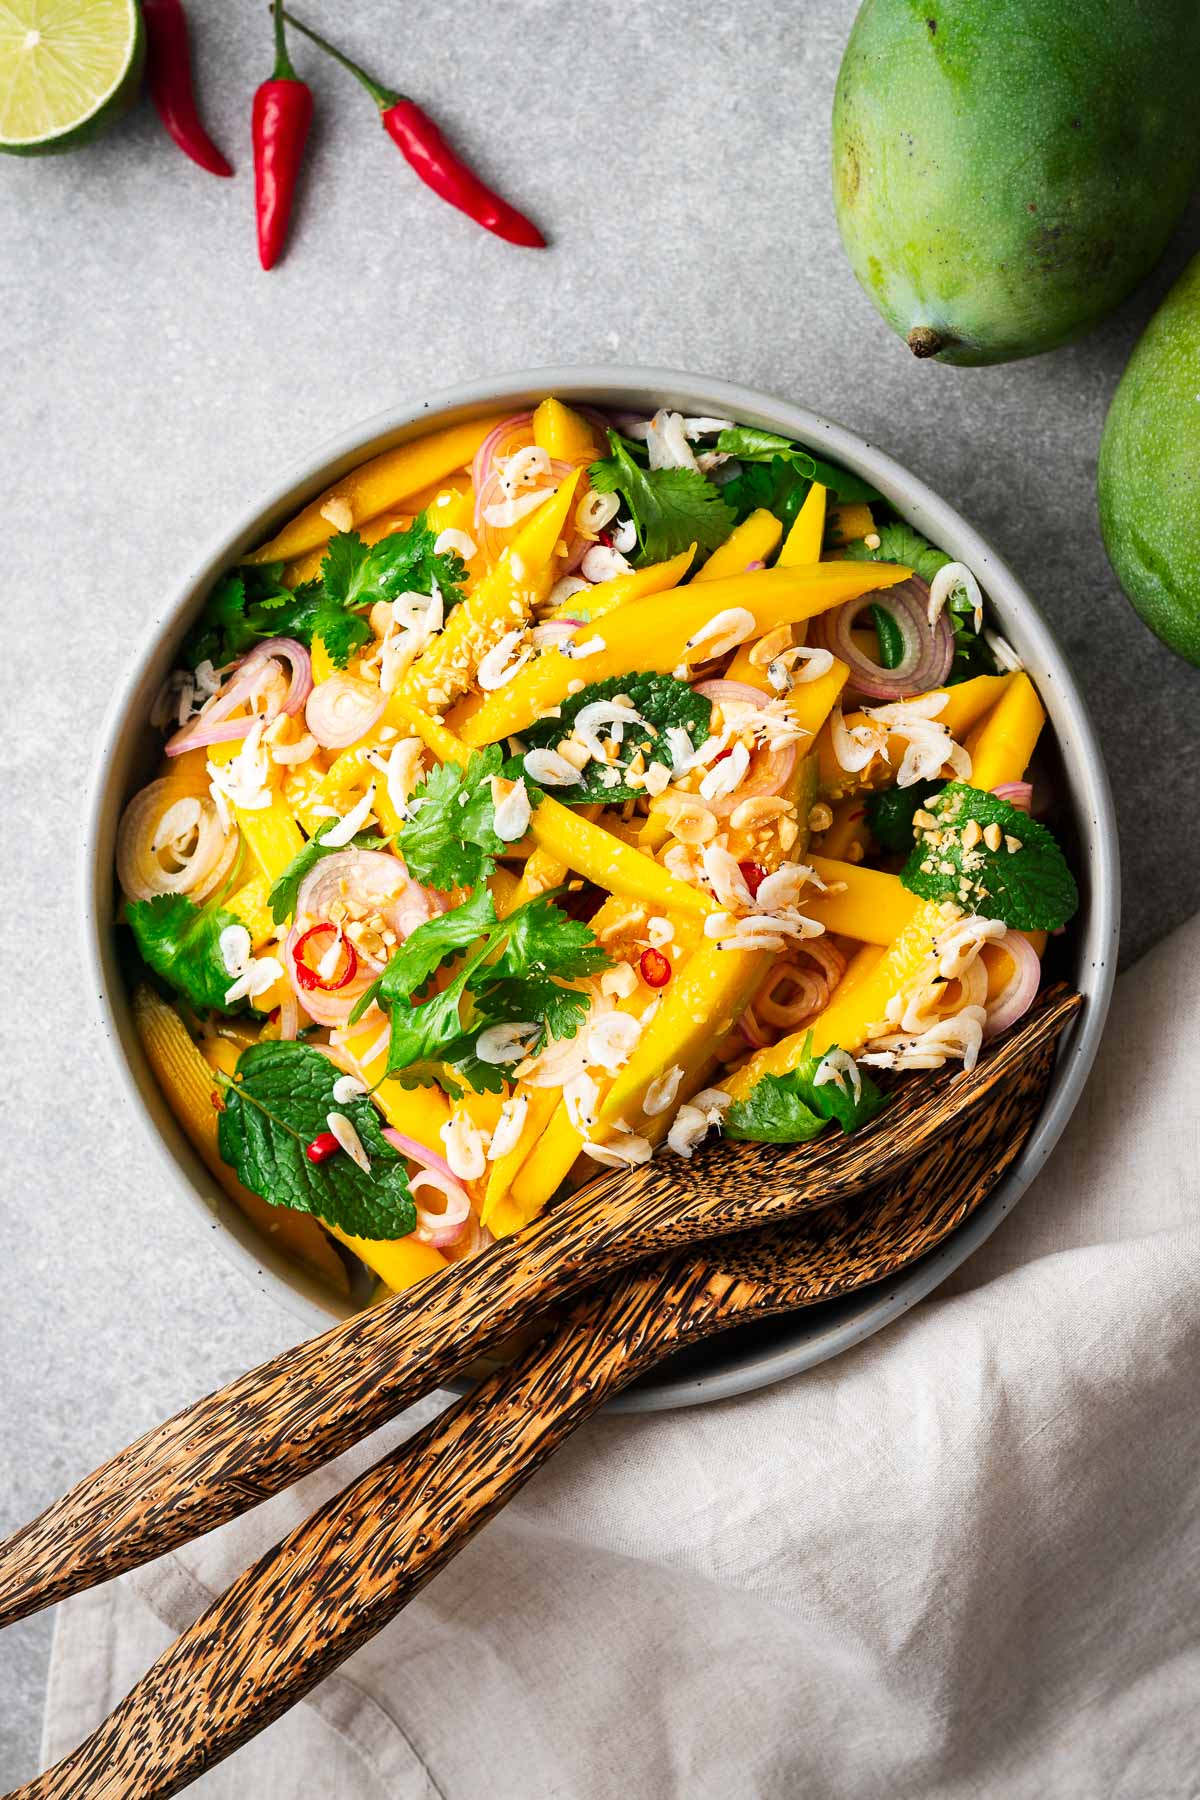 spicy thai green mango salad on a plate with wooden serving forks